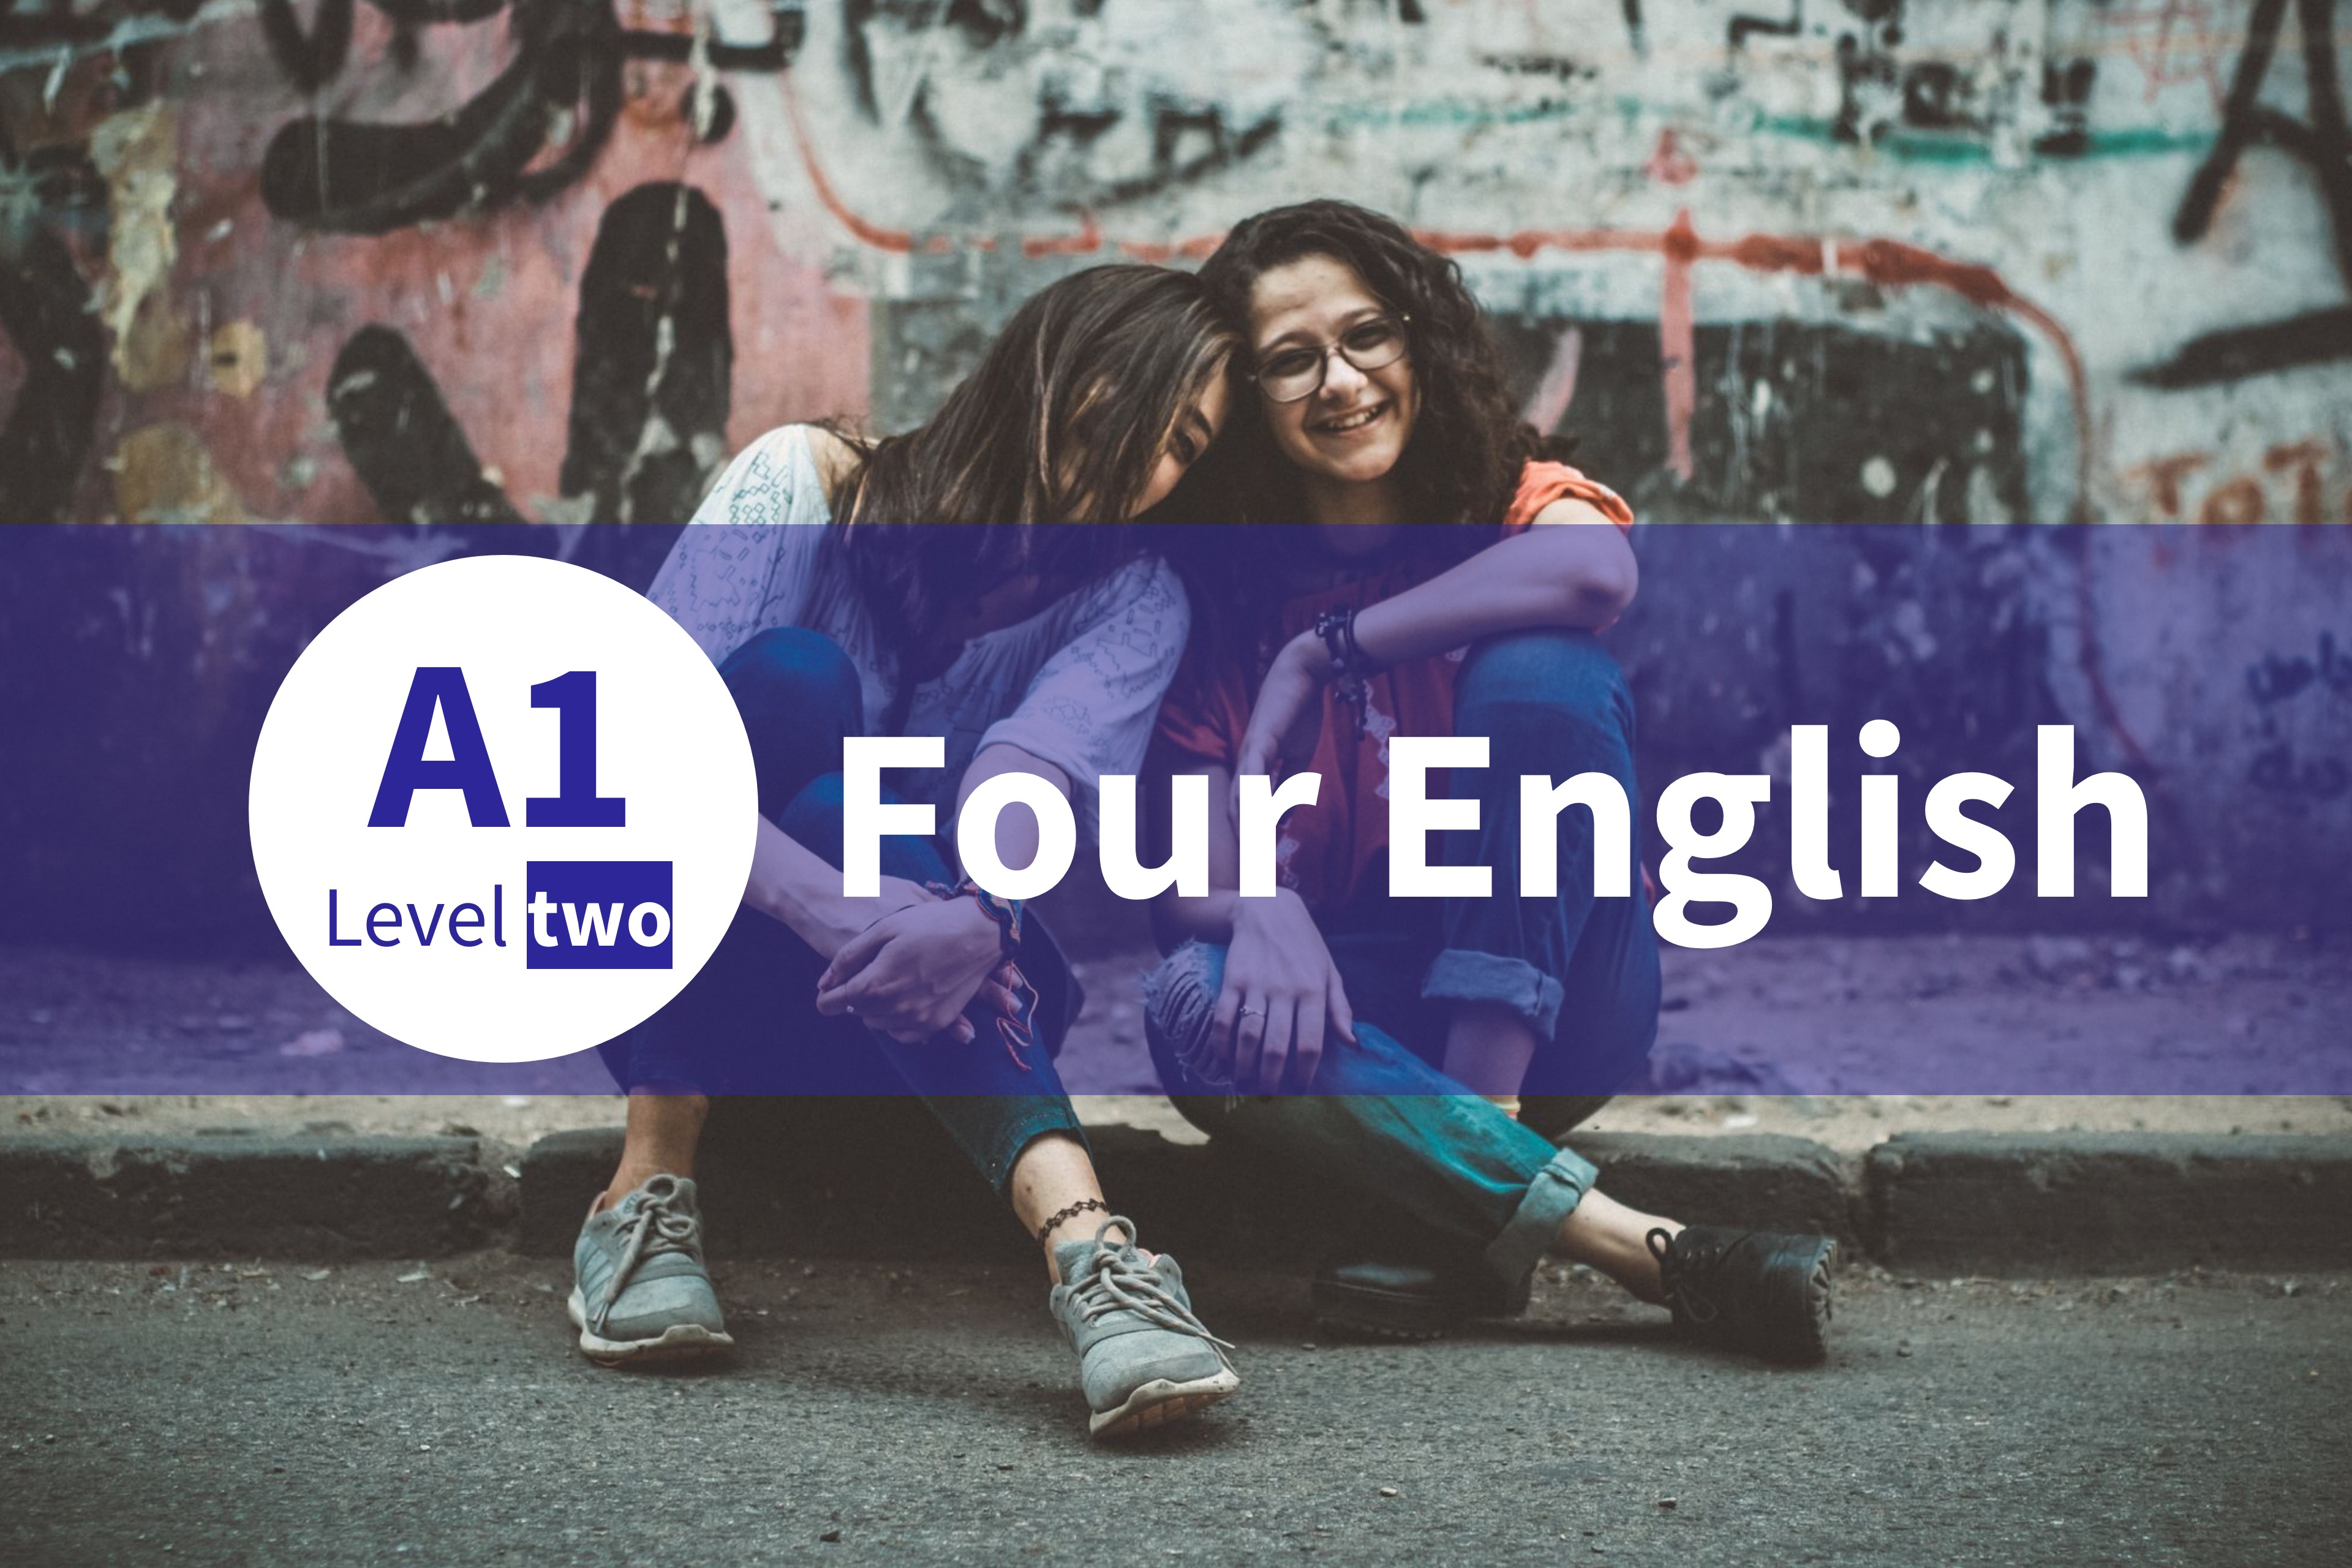 FOUR ENGLISH A1 - LEVEL TWO